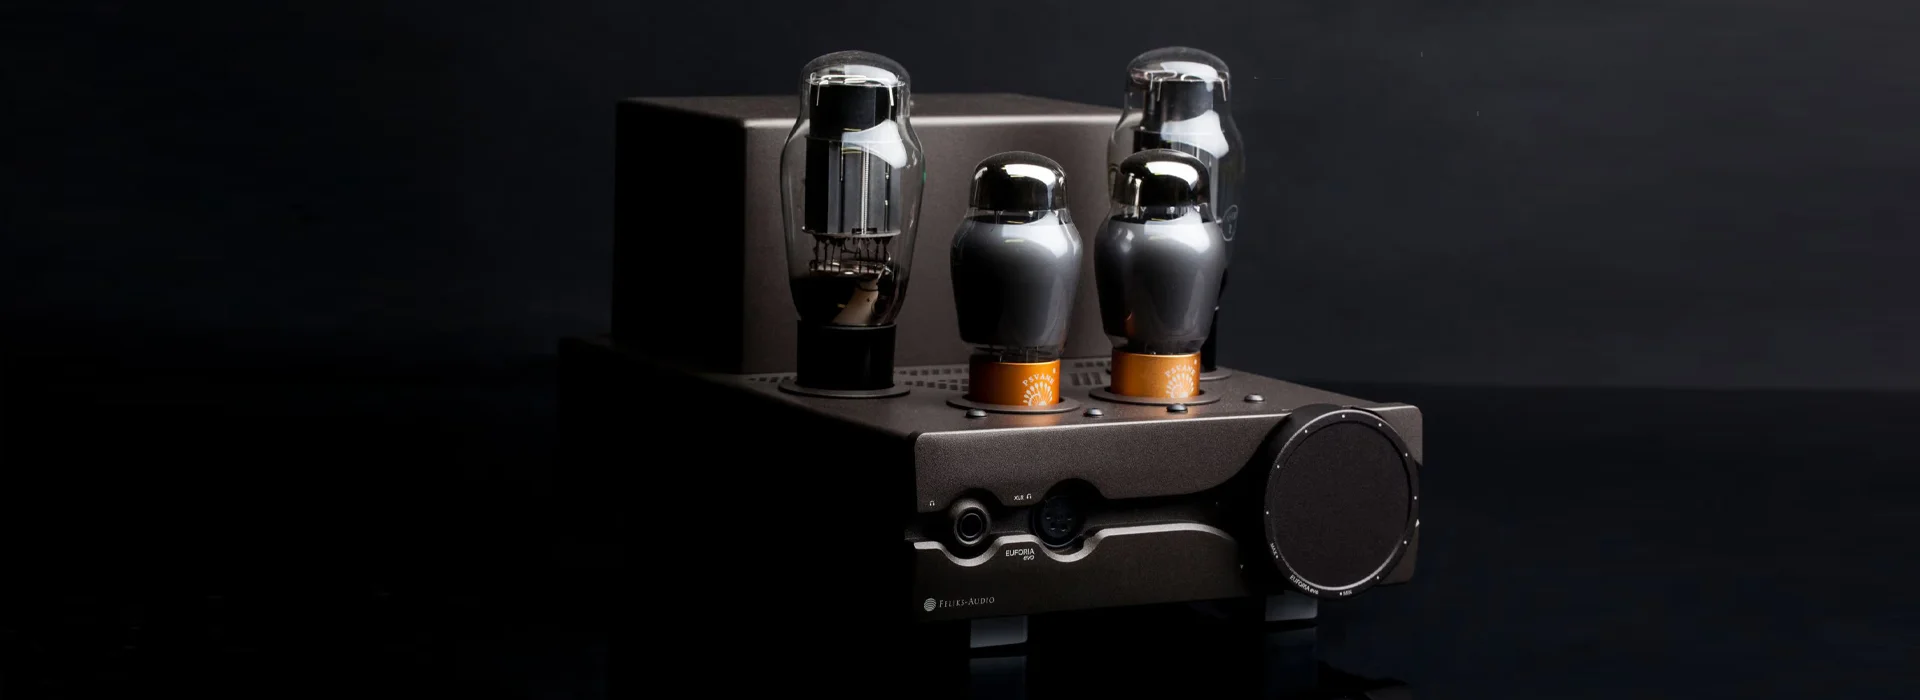 Hand-made Valve Amplifiers at The Audiobarn